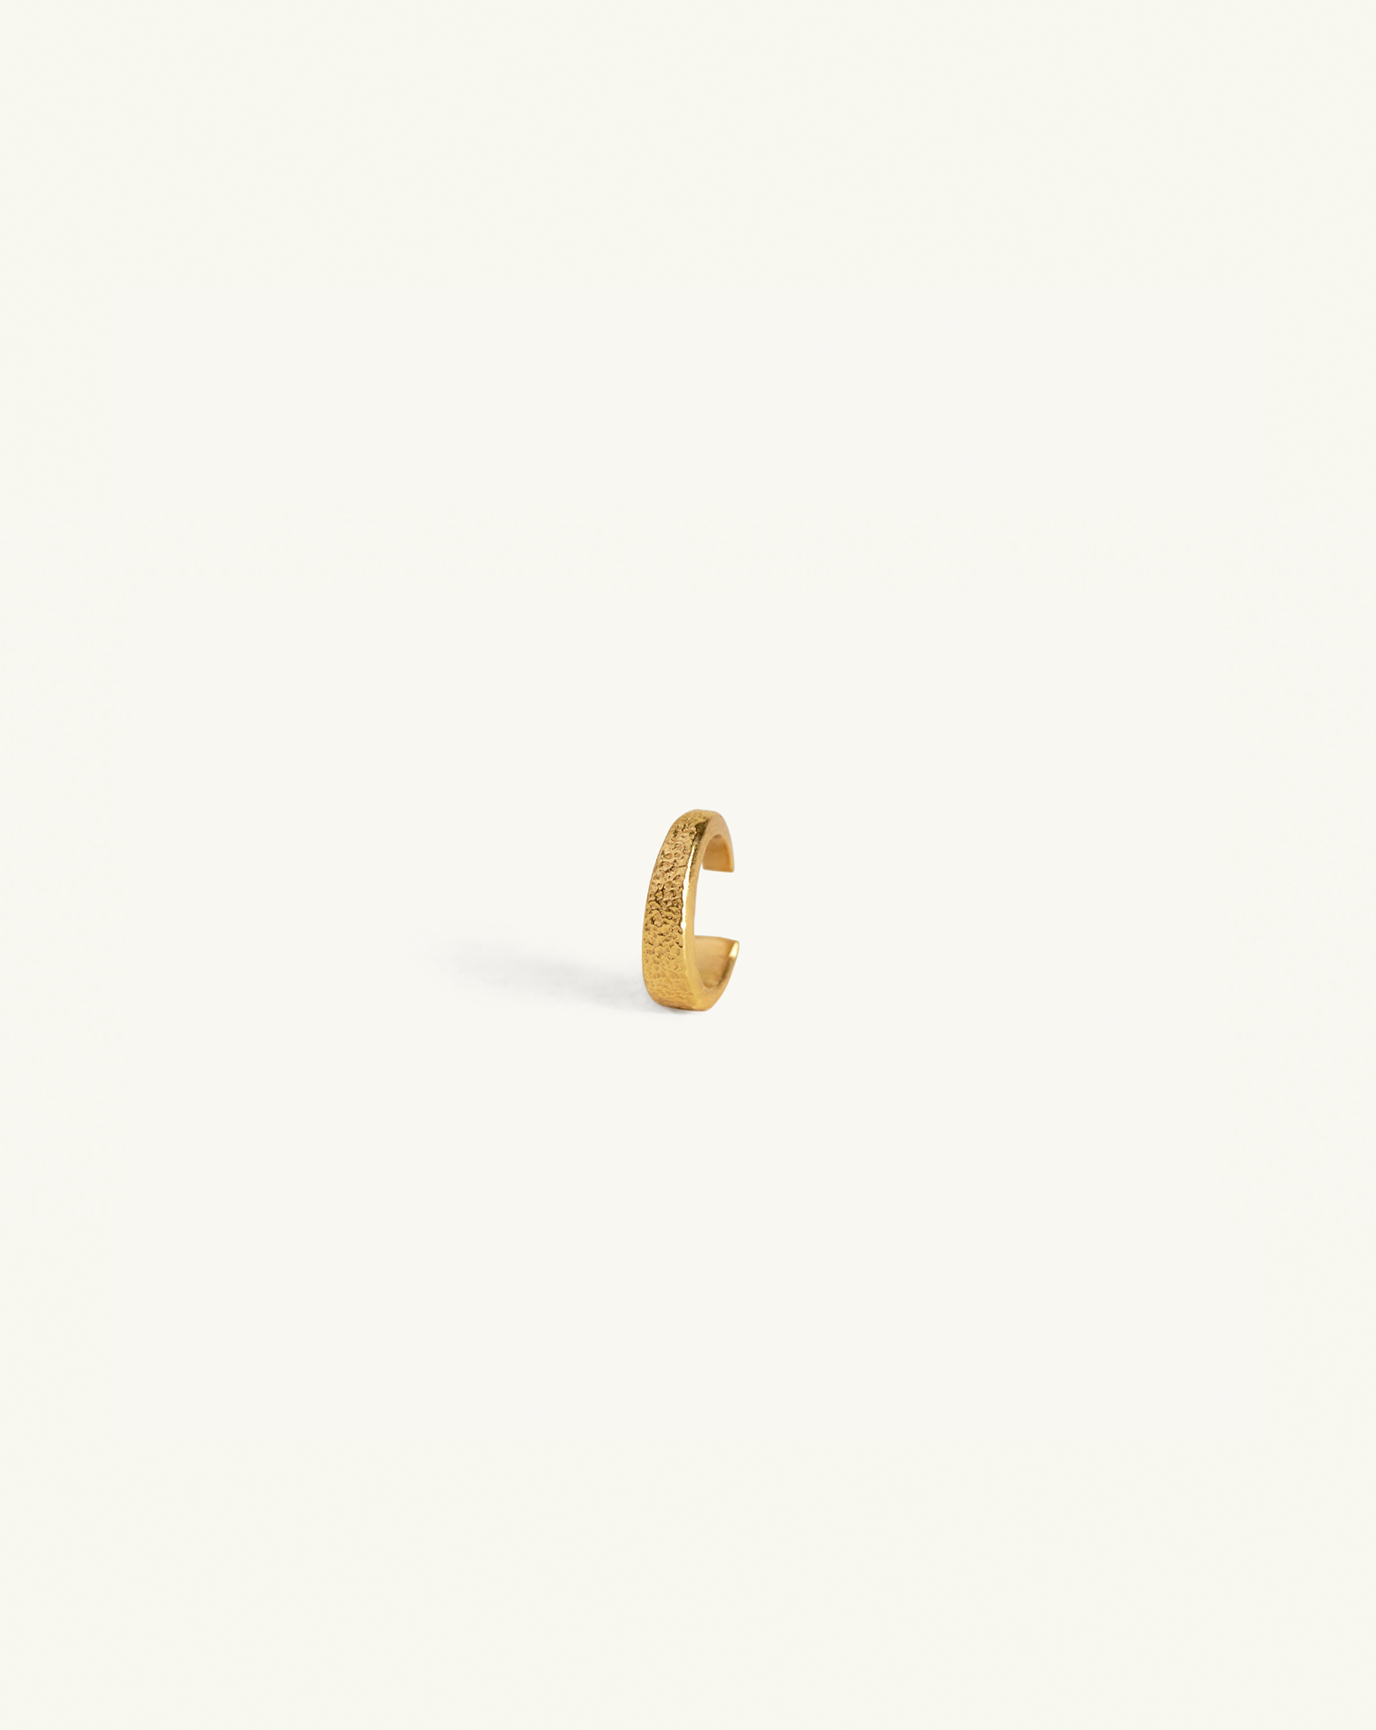 Product image of the small gold textured ear cuff